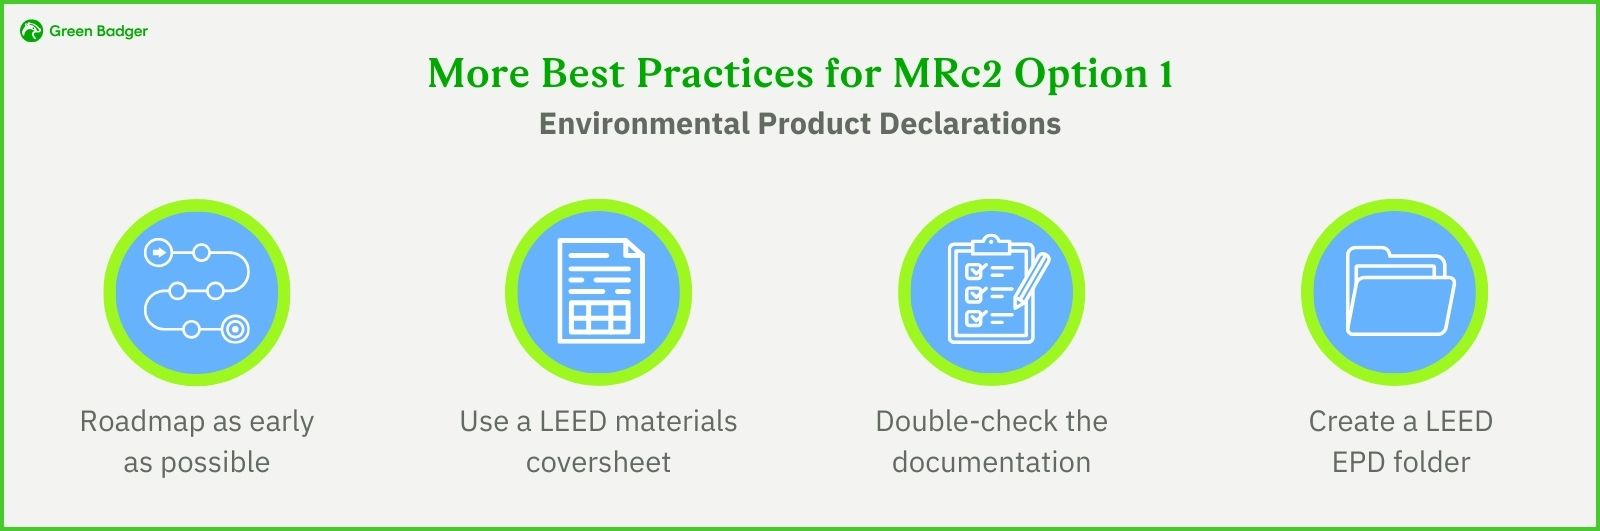 Green Badger's Ultimate Guide to LEED - Best Practices for MRc2 Option 2